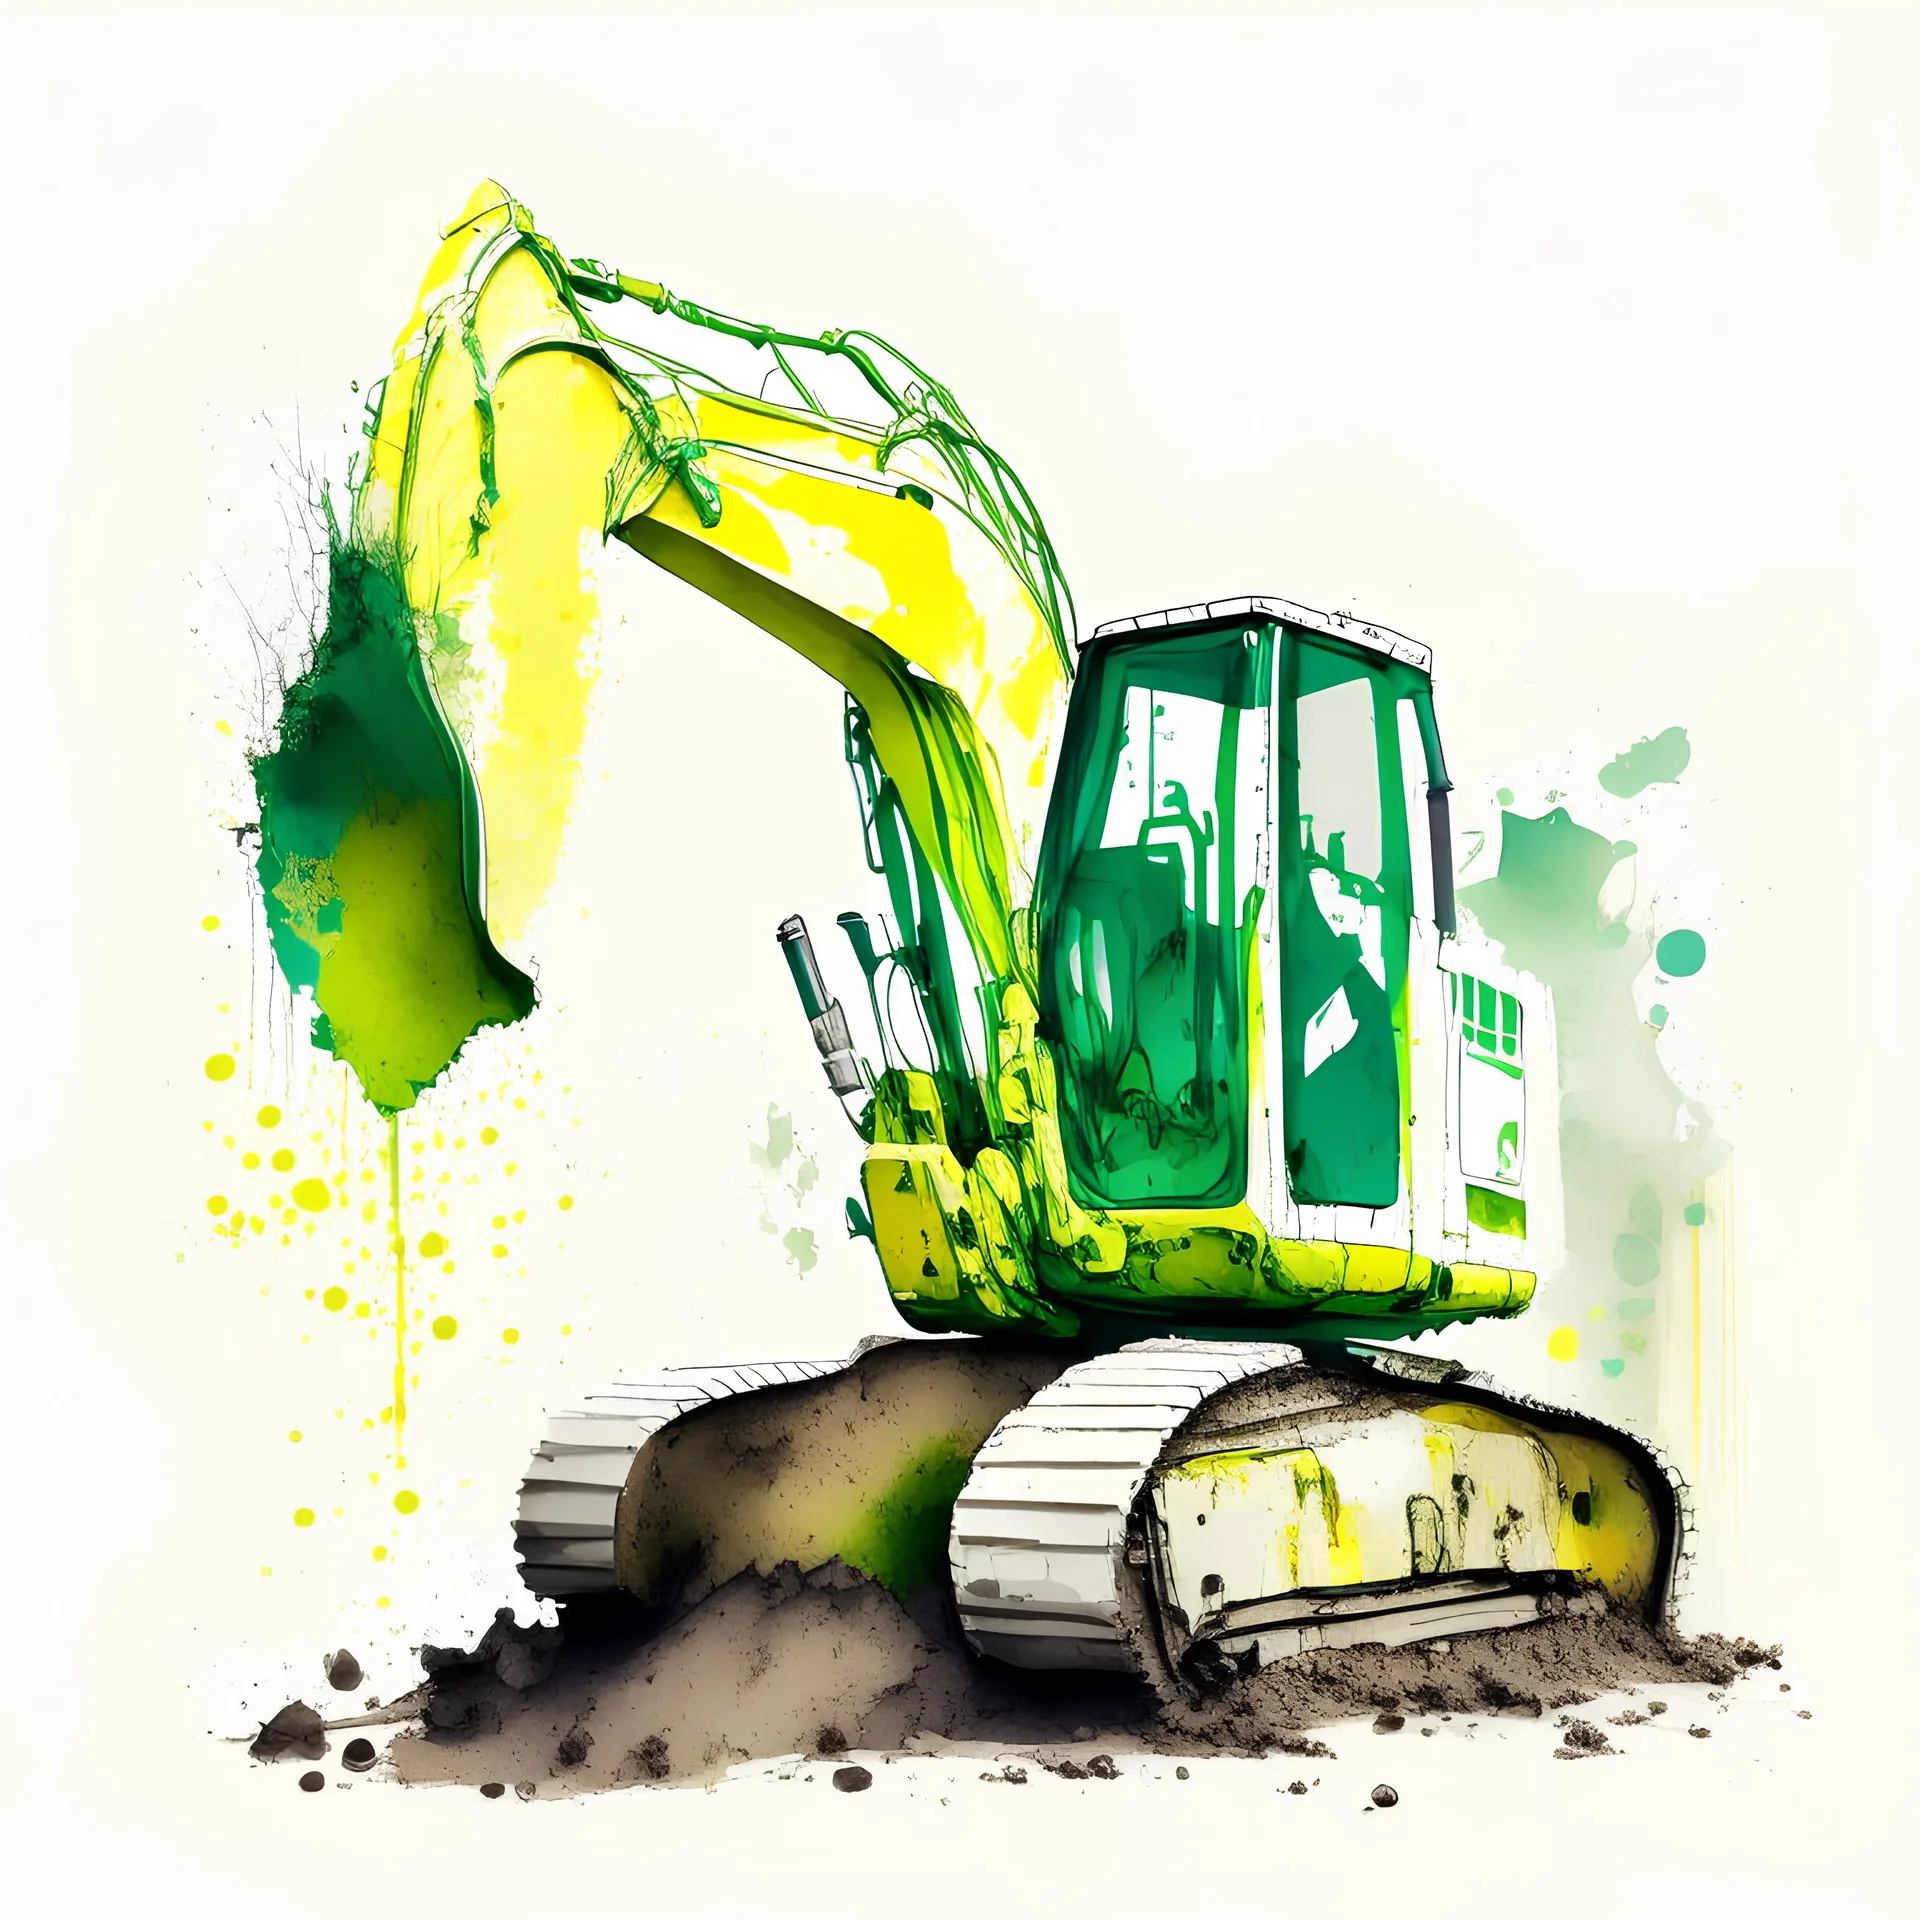 A picture of me, a beautiful excavator, as if hand-drawn, with green and yellow colors on a white background